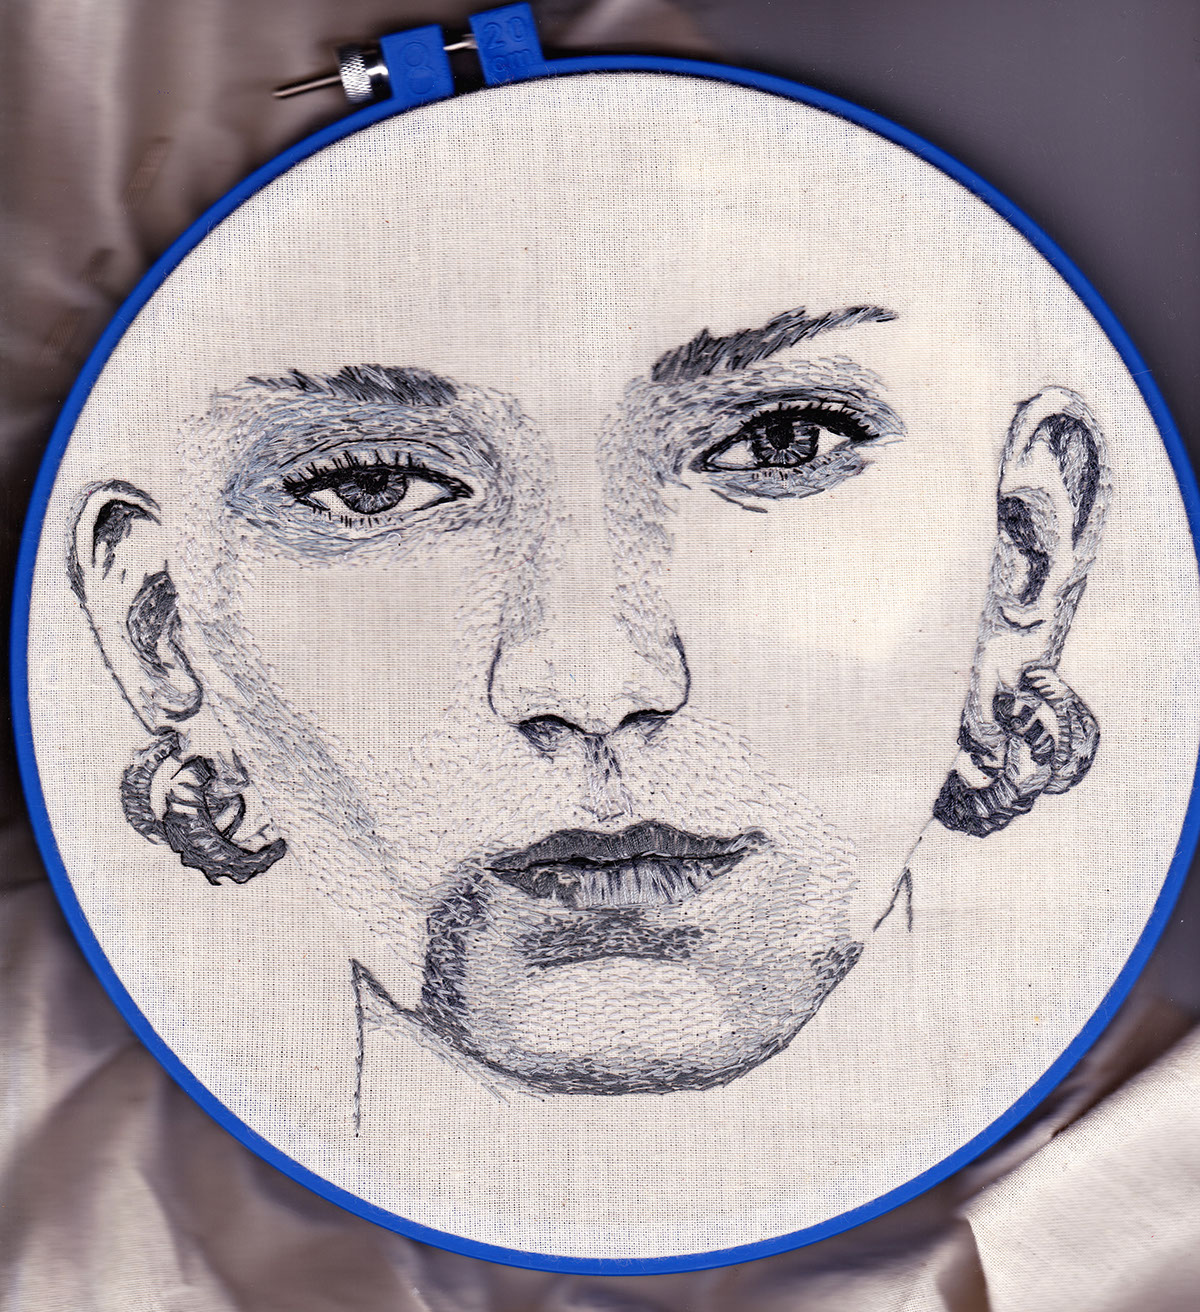 Embroidery embroidery hoop SEW stitch craft handmade Calico organza sewing embroidery floss mental mental health mental illness Schizophrenia multiple personality disorder